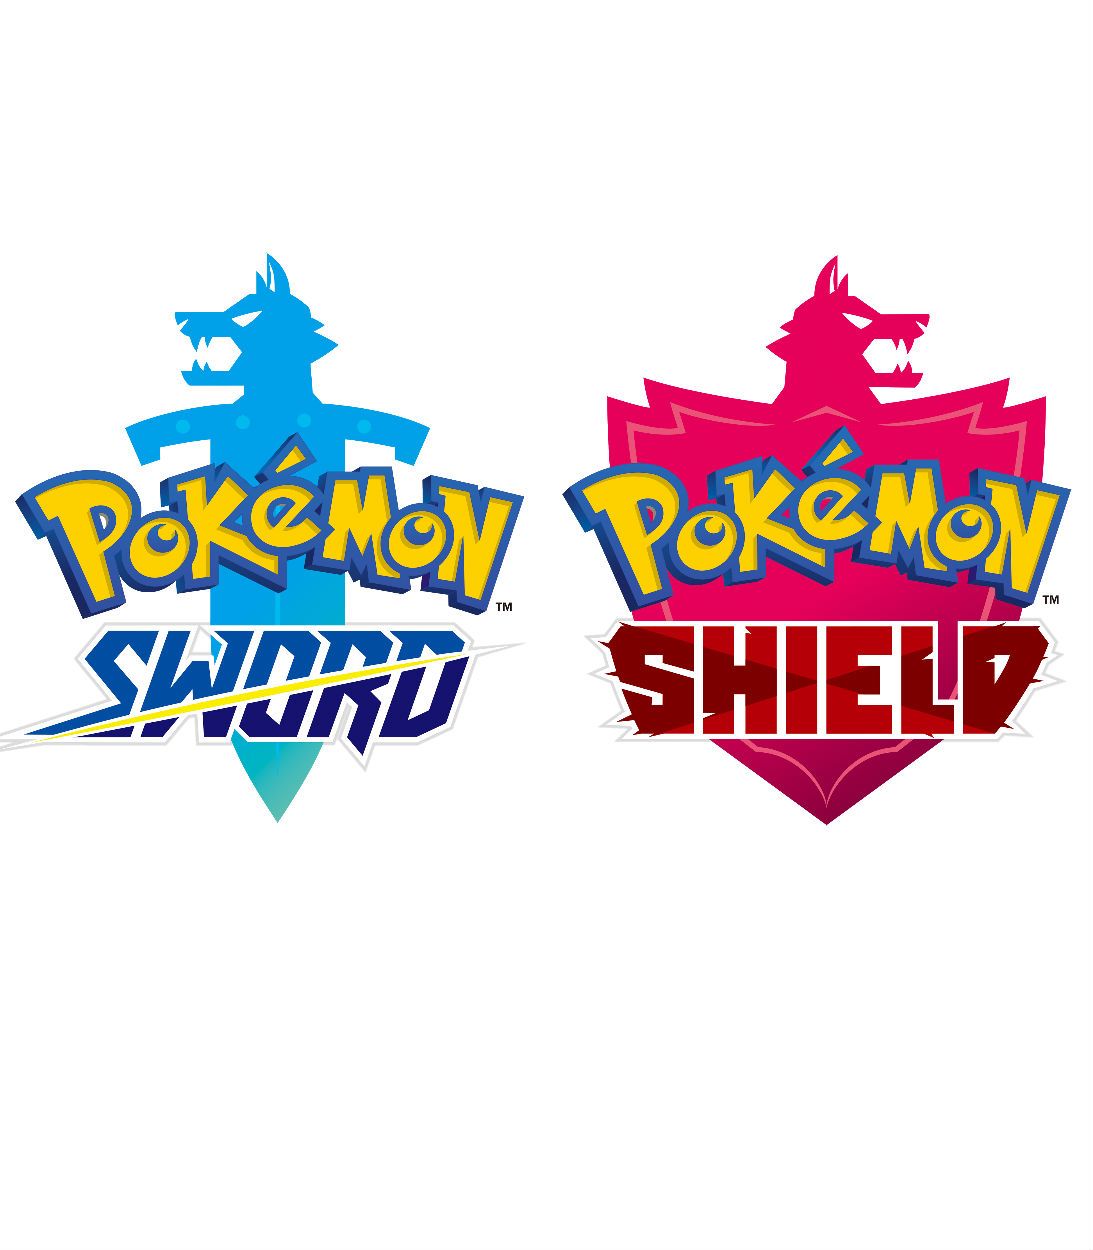 The logos for Pokemon Sword and Shield against a white background